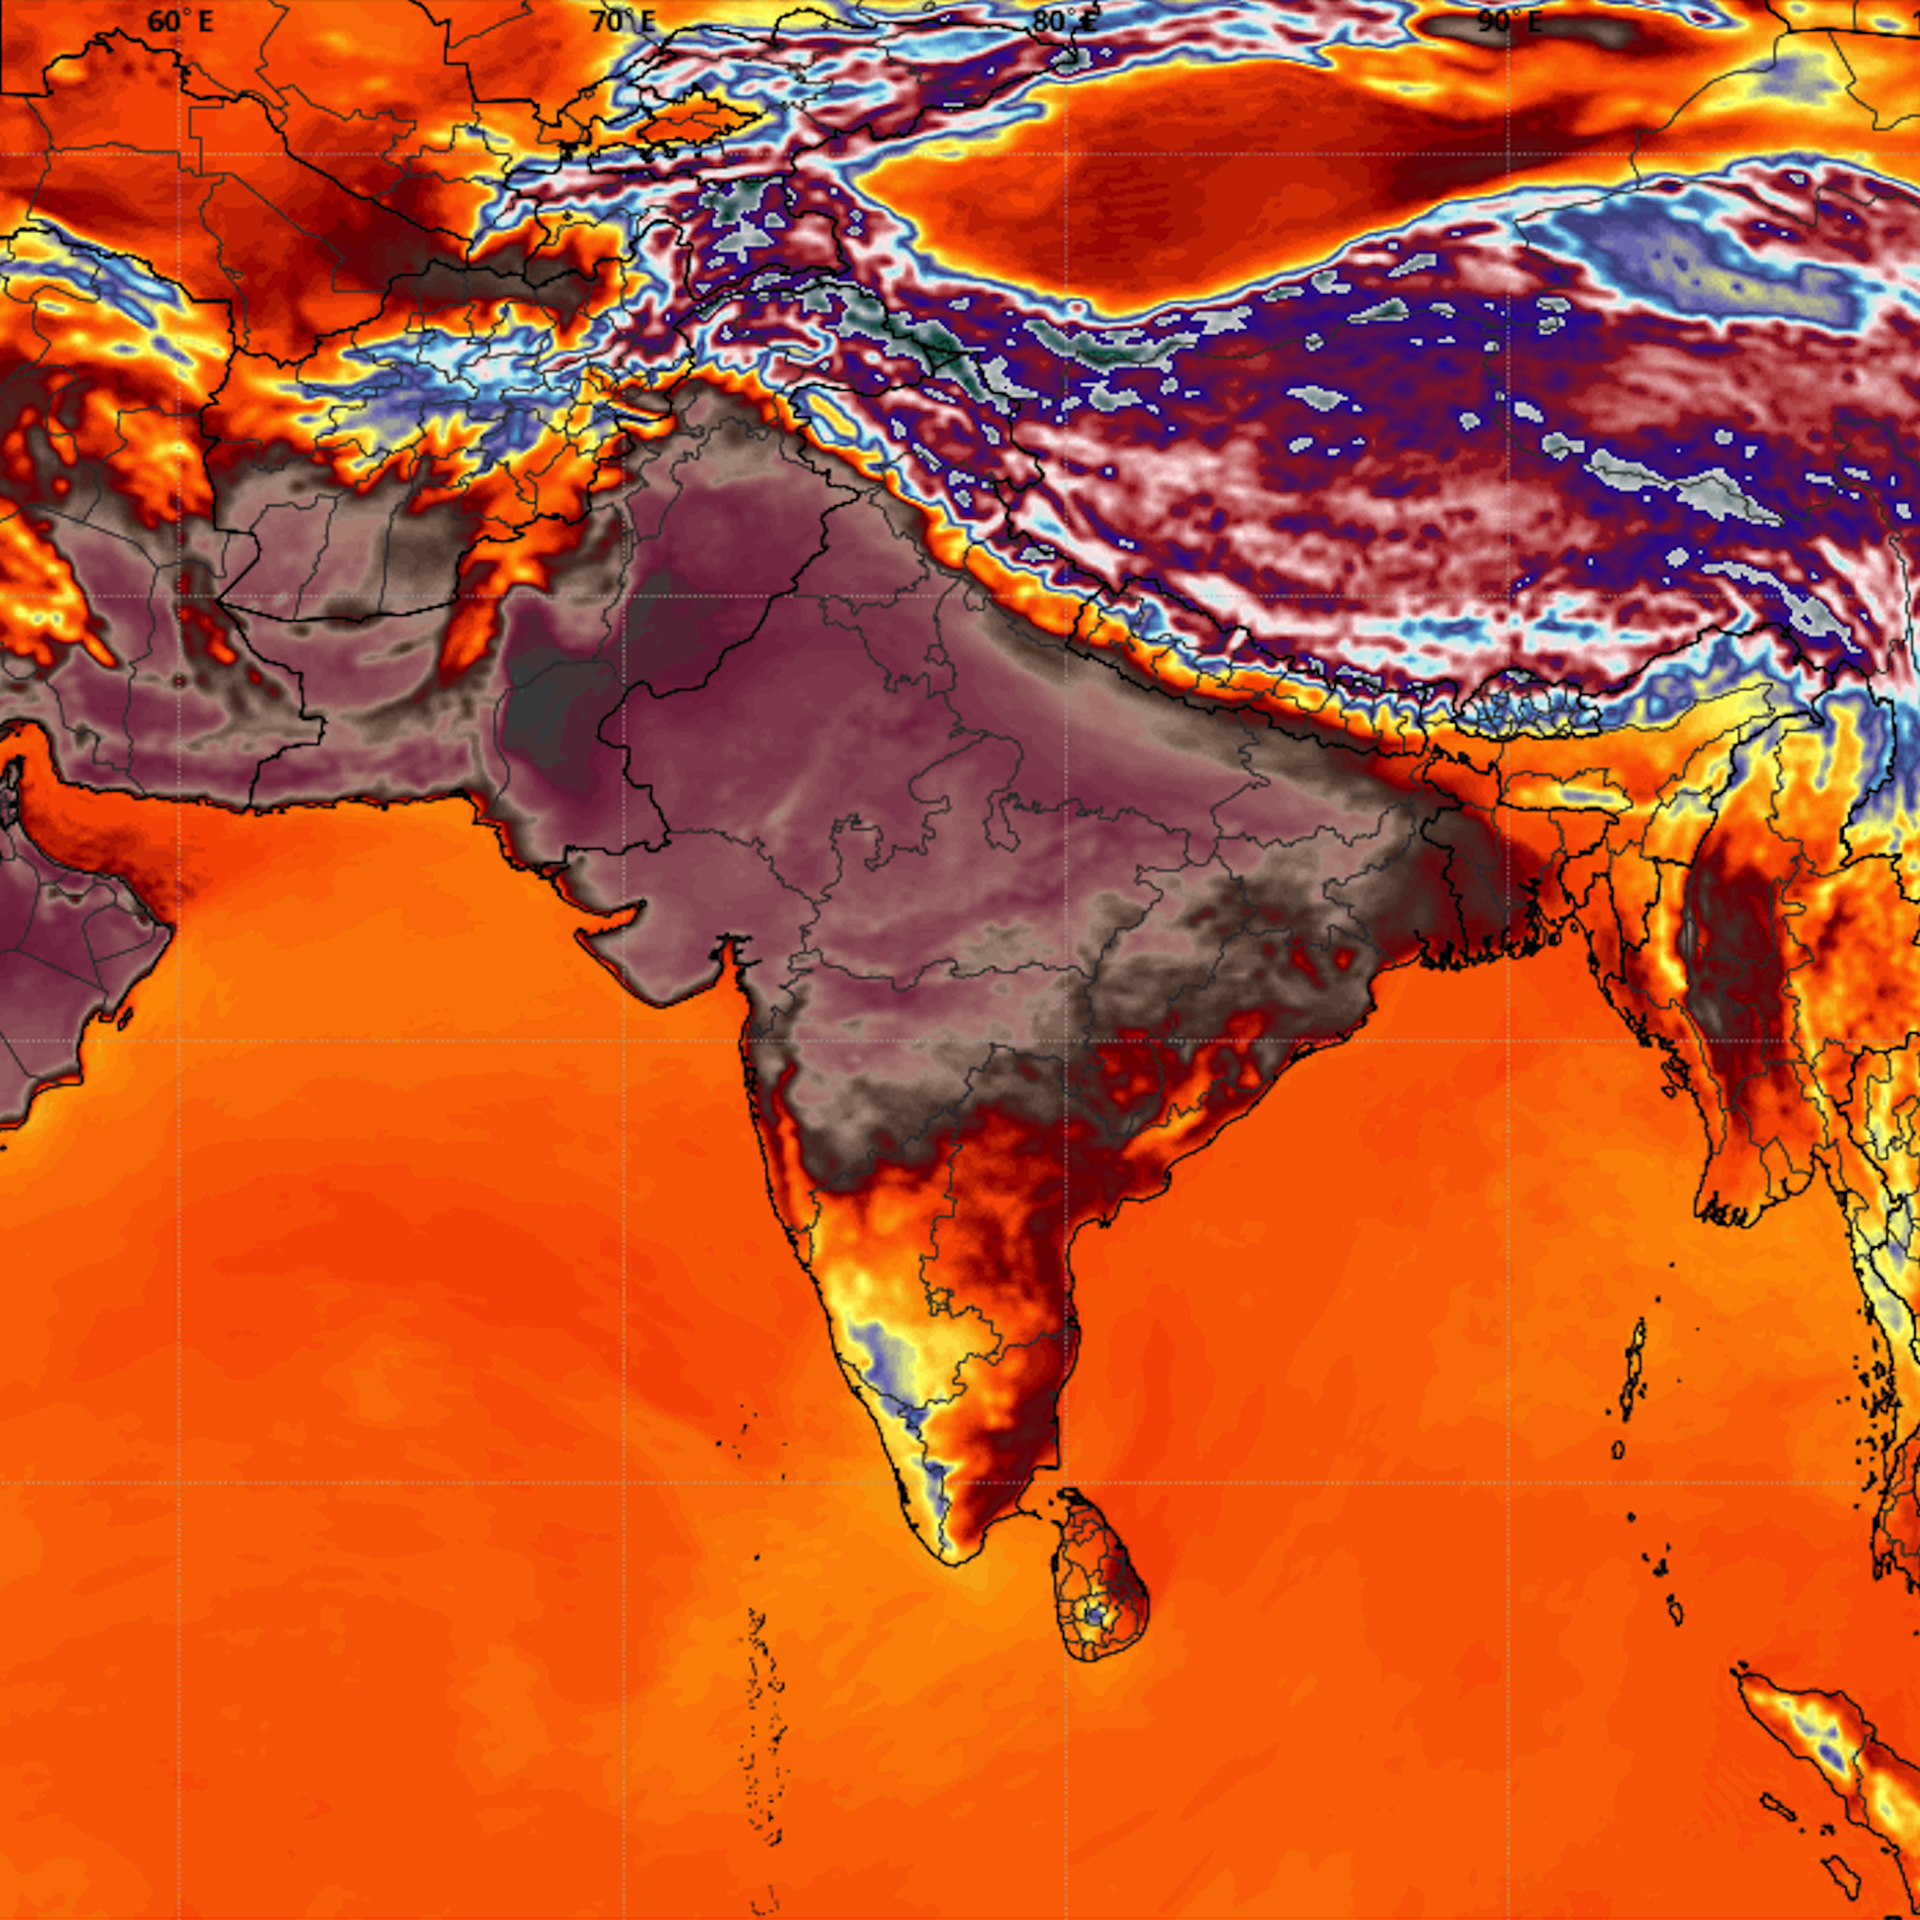 Computer model depiction of high temperatures on May 19, 2022.